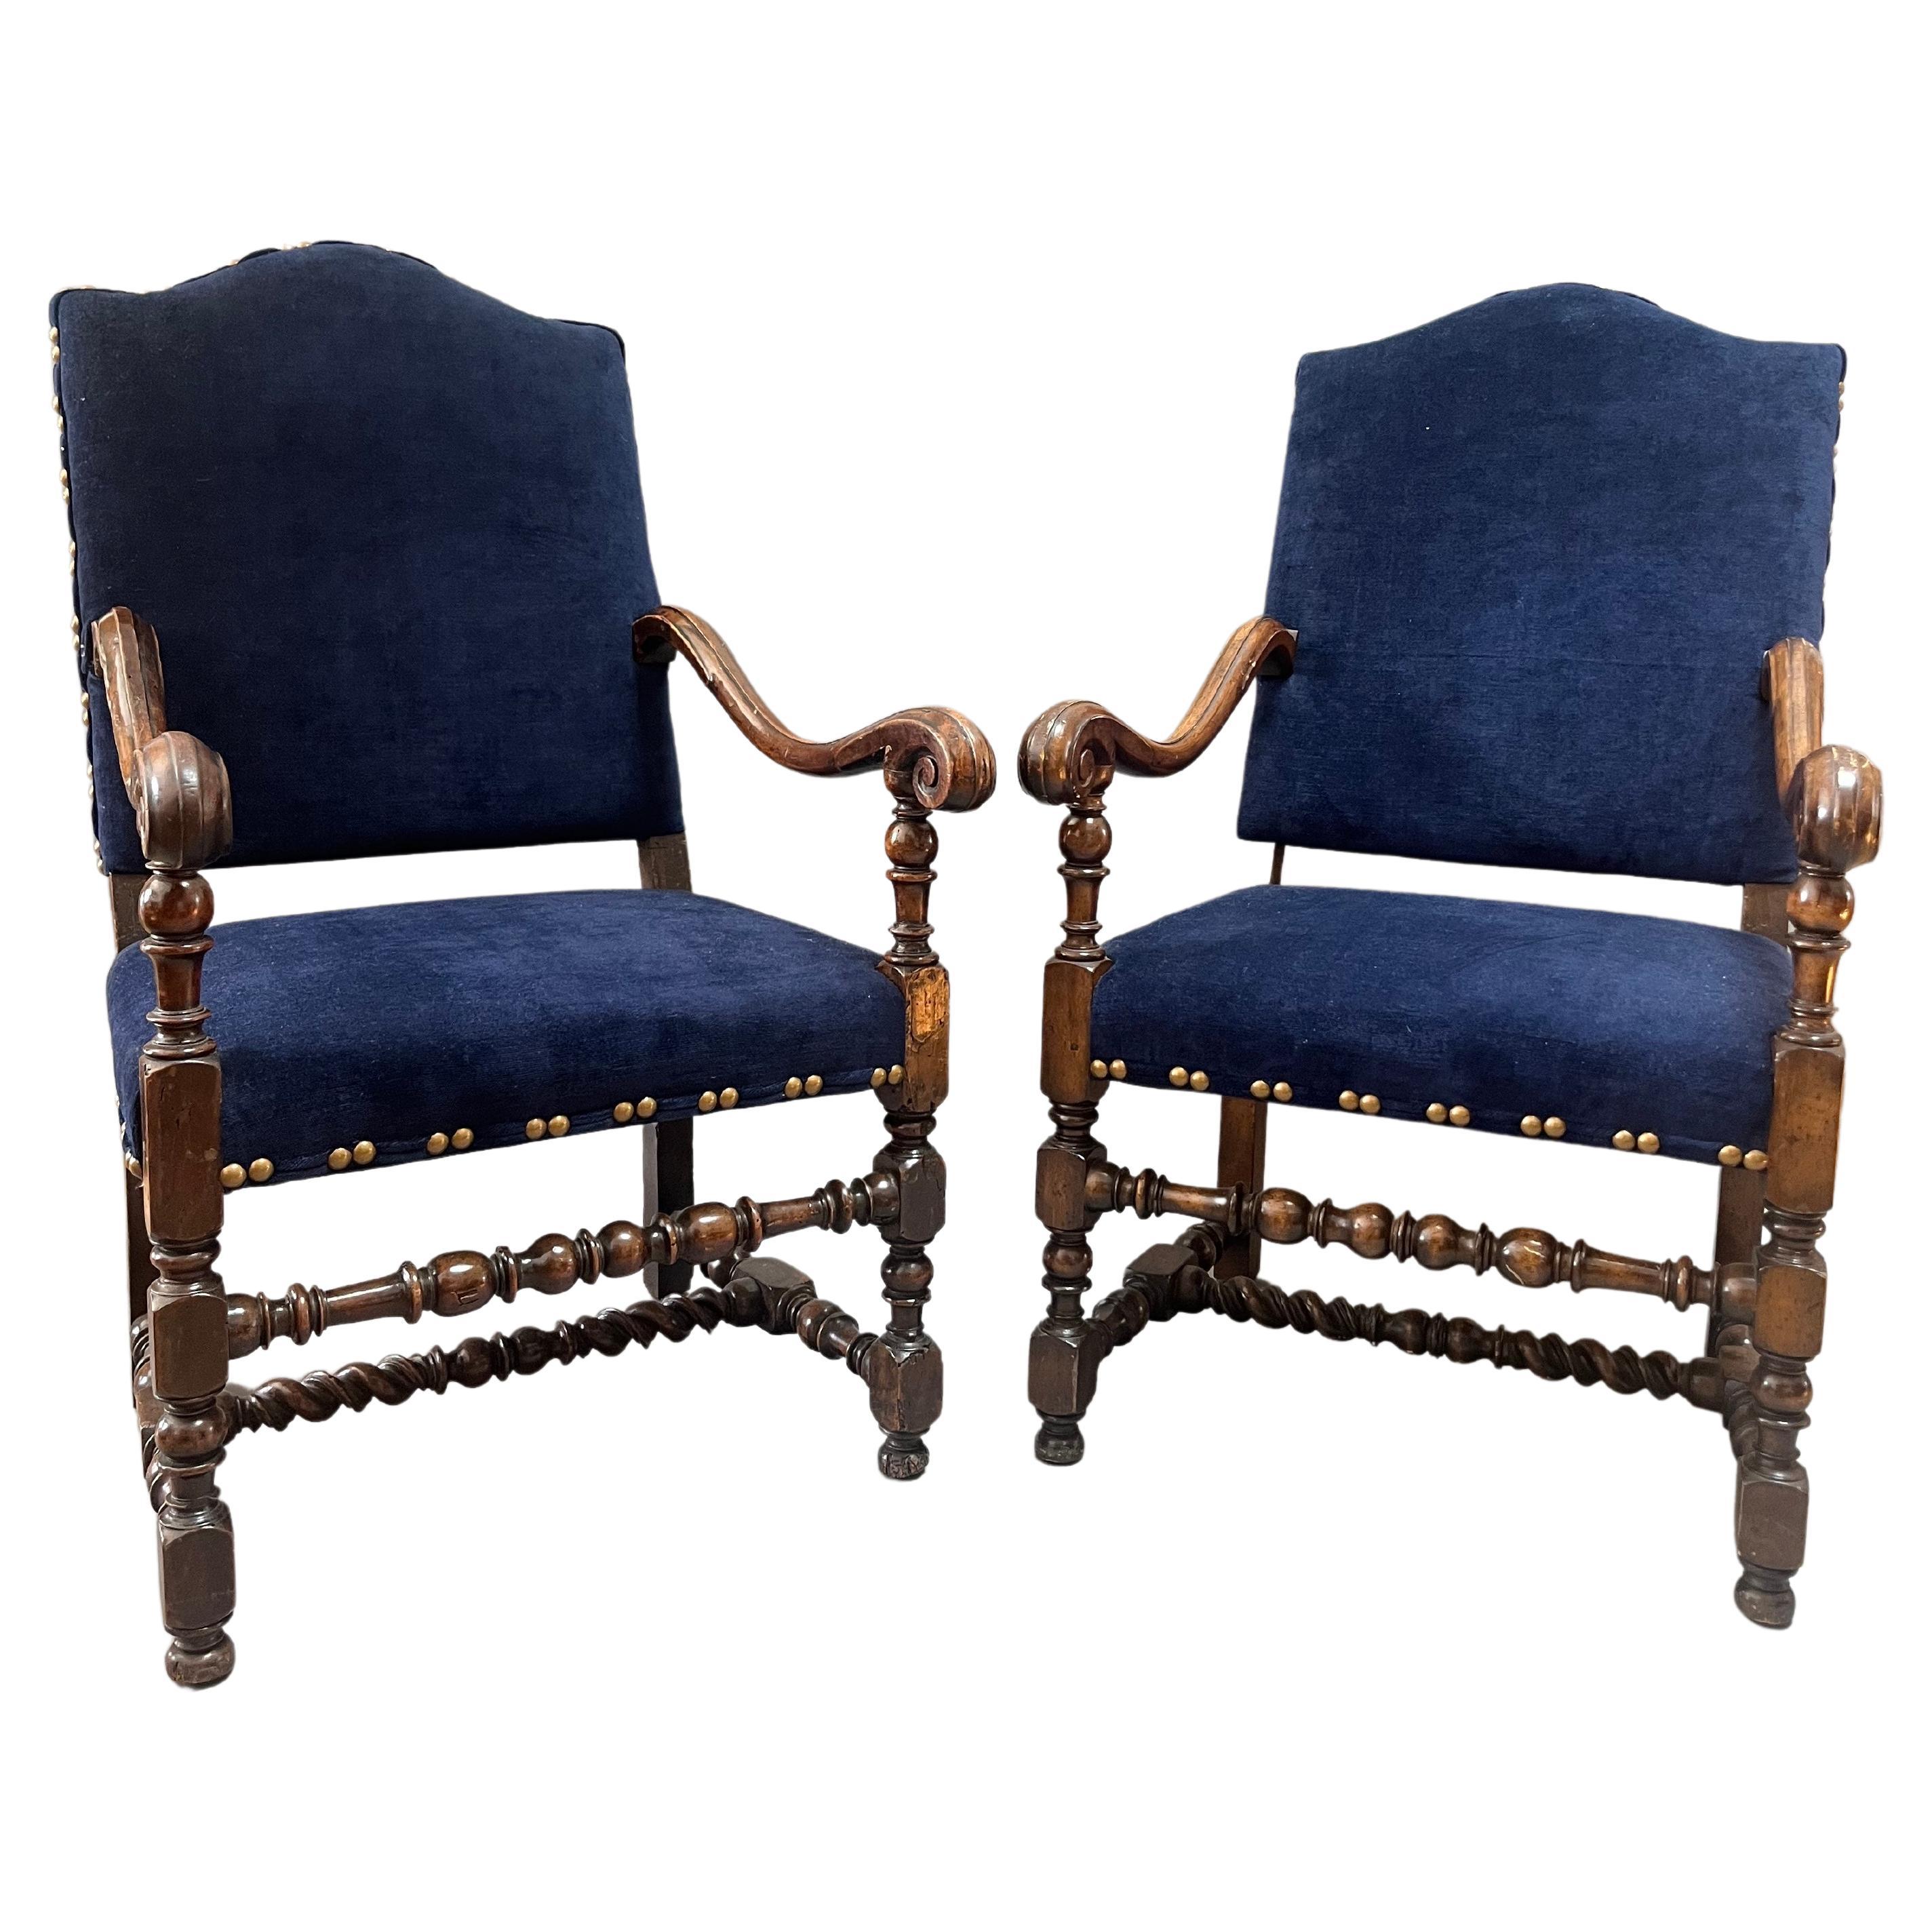  Extraordinary Pair of French Louis XIV  Period 17th Century Armchairs.    For Sale